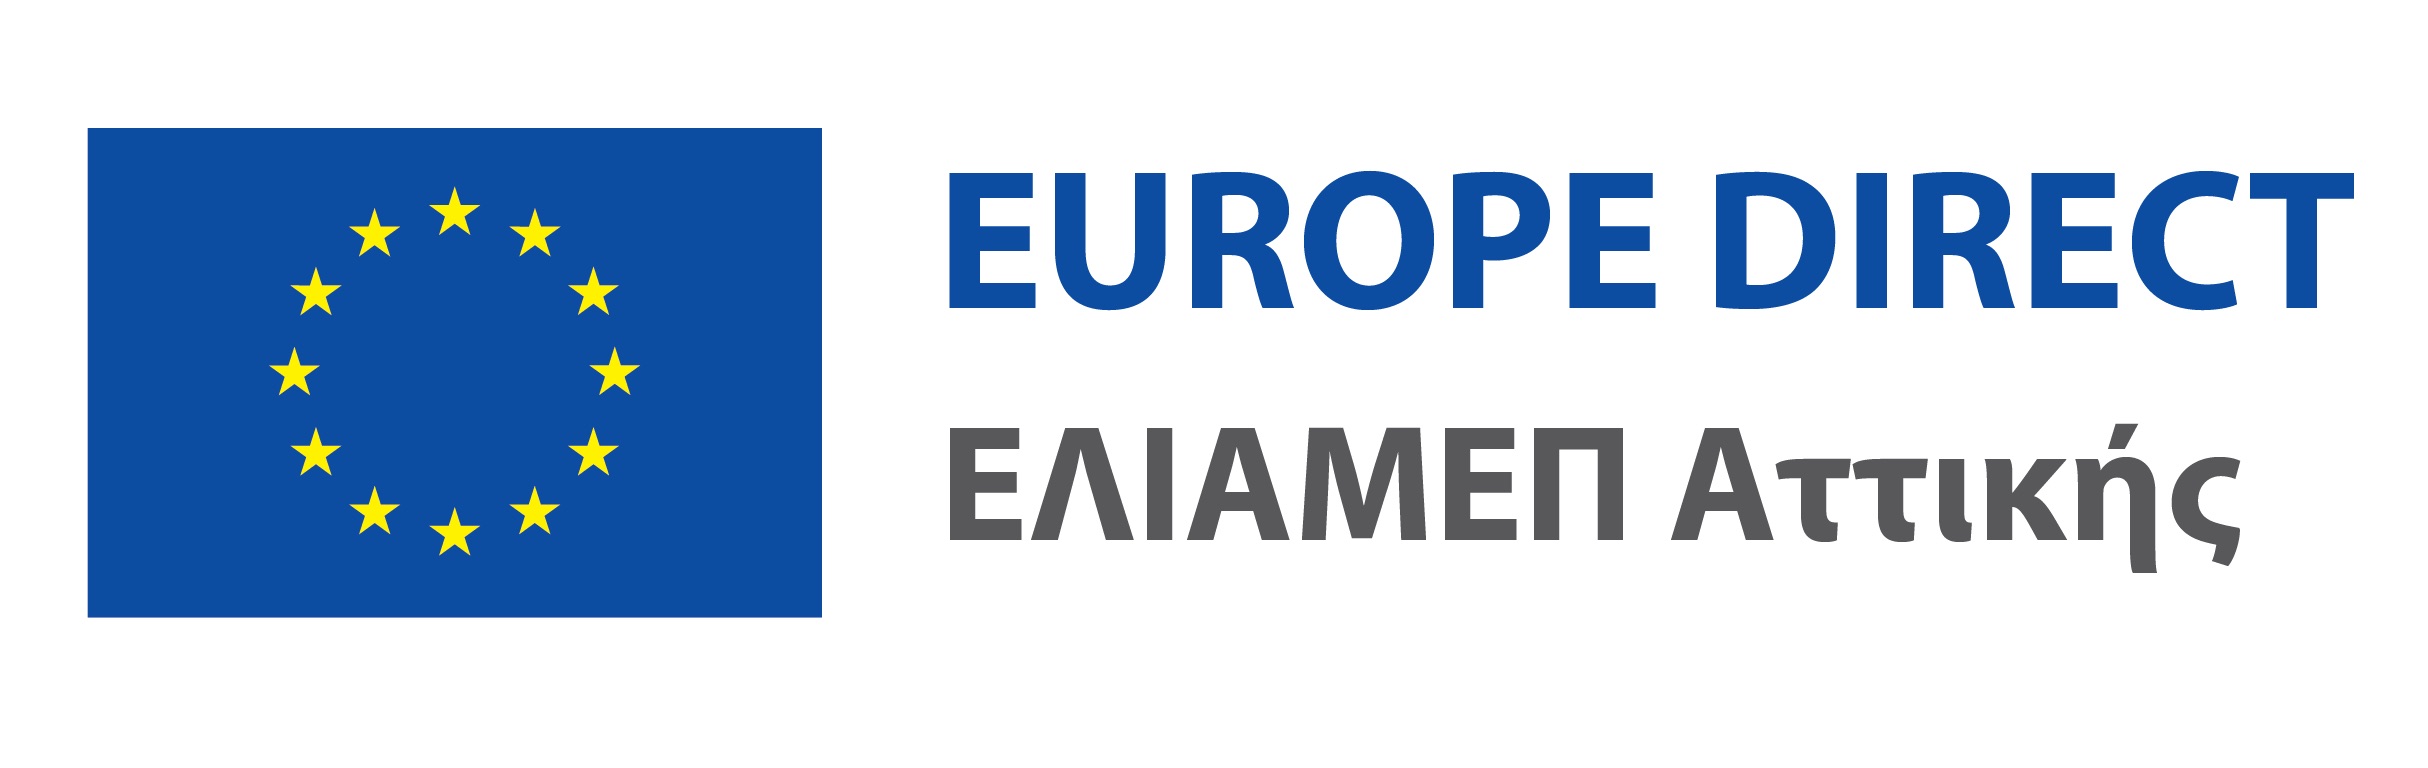 Logo.Europe Direct ELIAMEP Attikis hosted at the Hellenic Foundation for European and Foreign Policy (ELIAMEP)